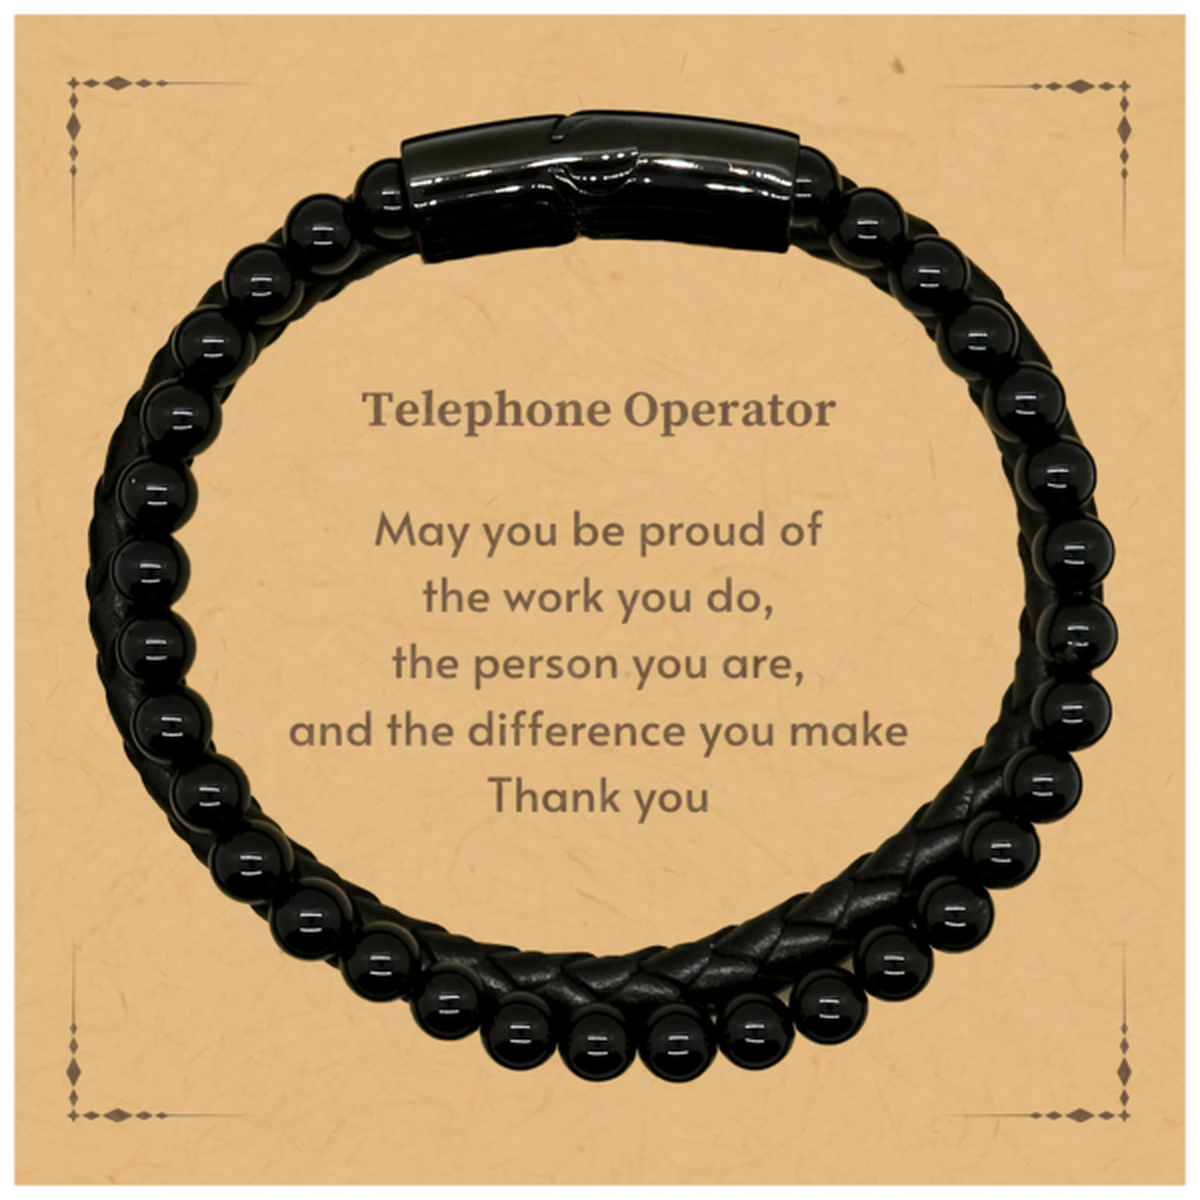 Heartwarming Stone Leather Bracelets Retirement Coworkers Gifts for Telephone Operator, Telephone Operator May You be proud of the work you do, the person you are Gifts for Boss Men Women Friends